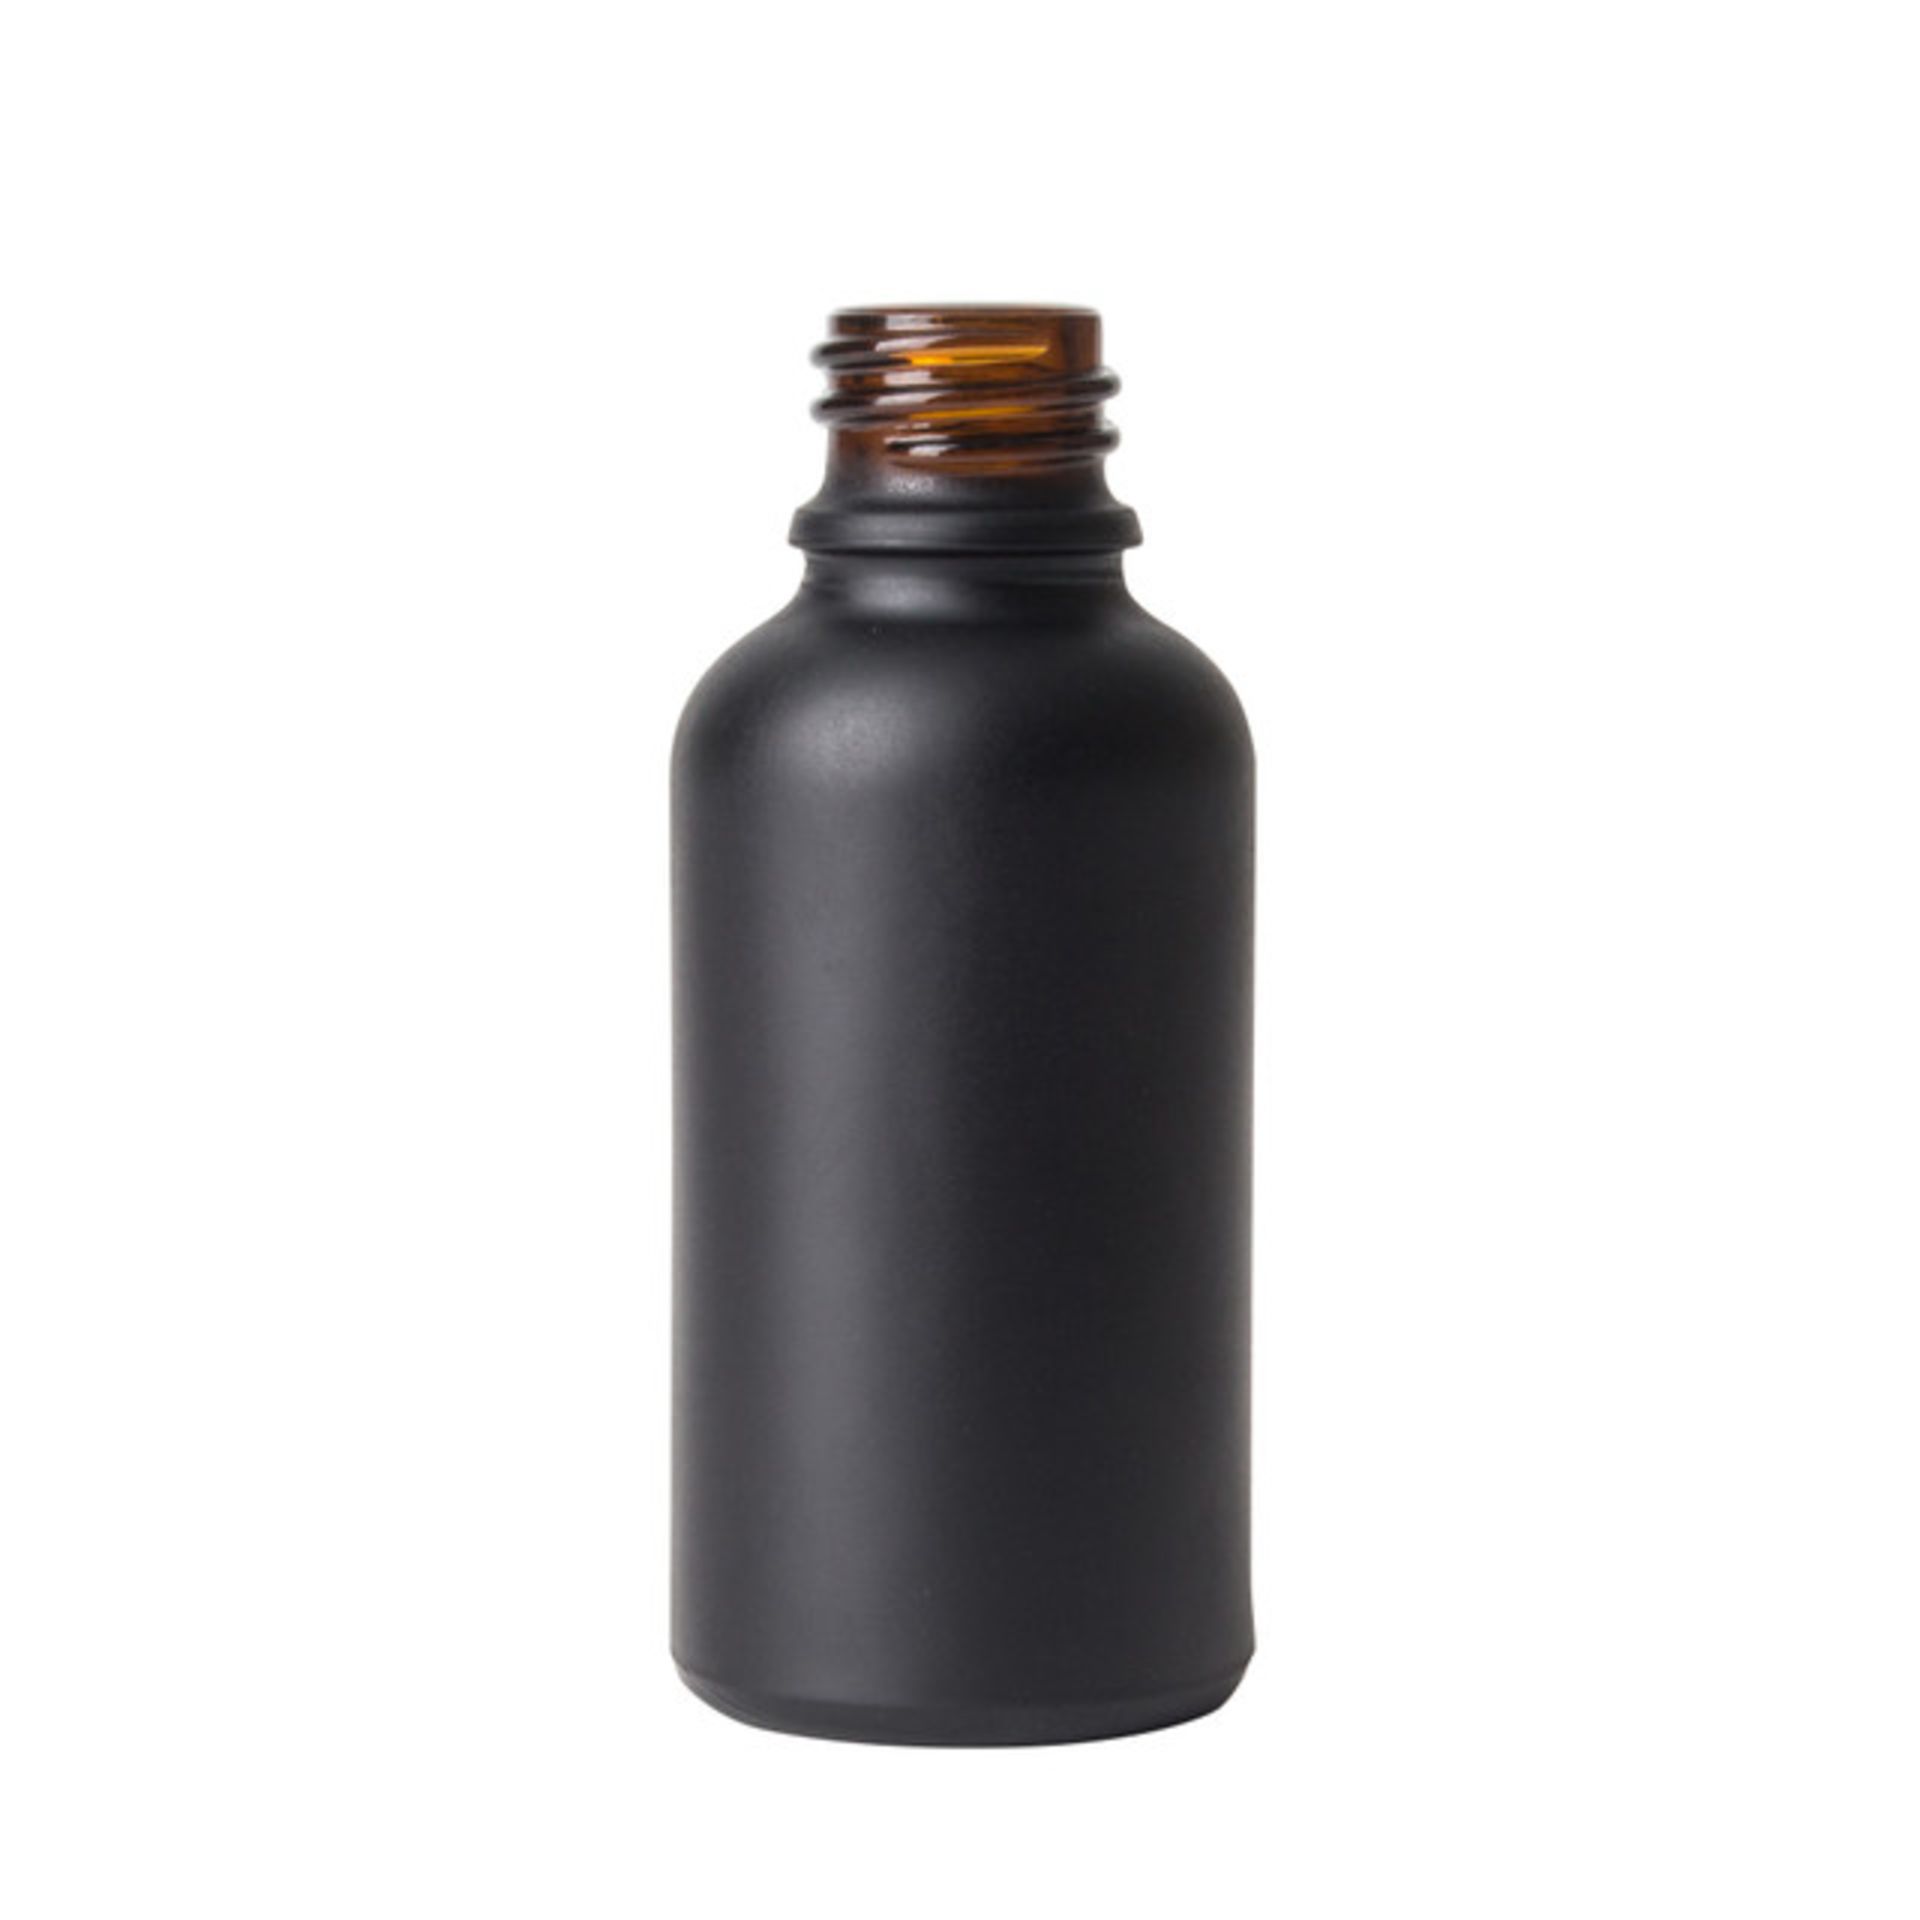 (Located in: Moreno Valley, CA, US) 30mL Matte Black Glass Dropper Bottle (18/410), Aprox Qty 16,500